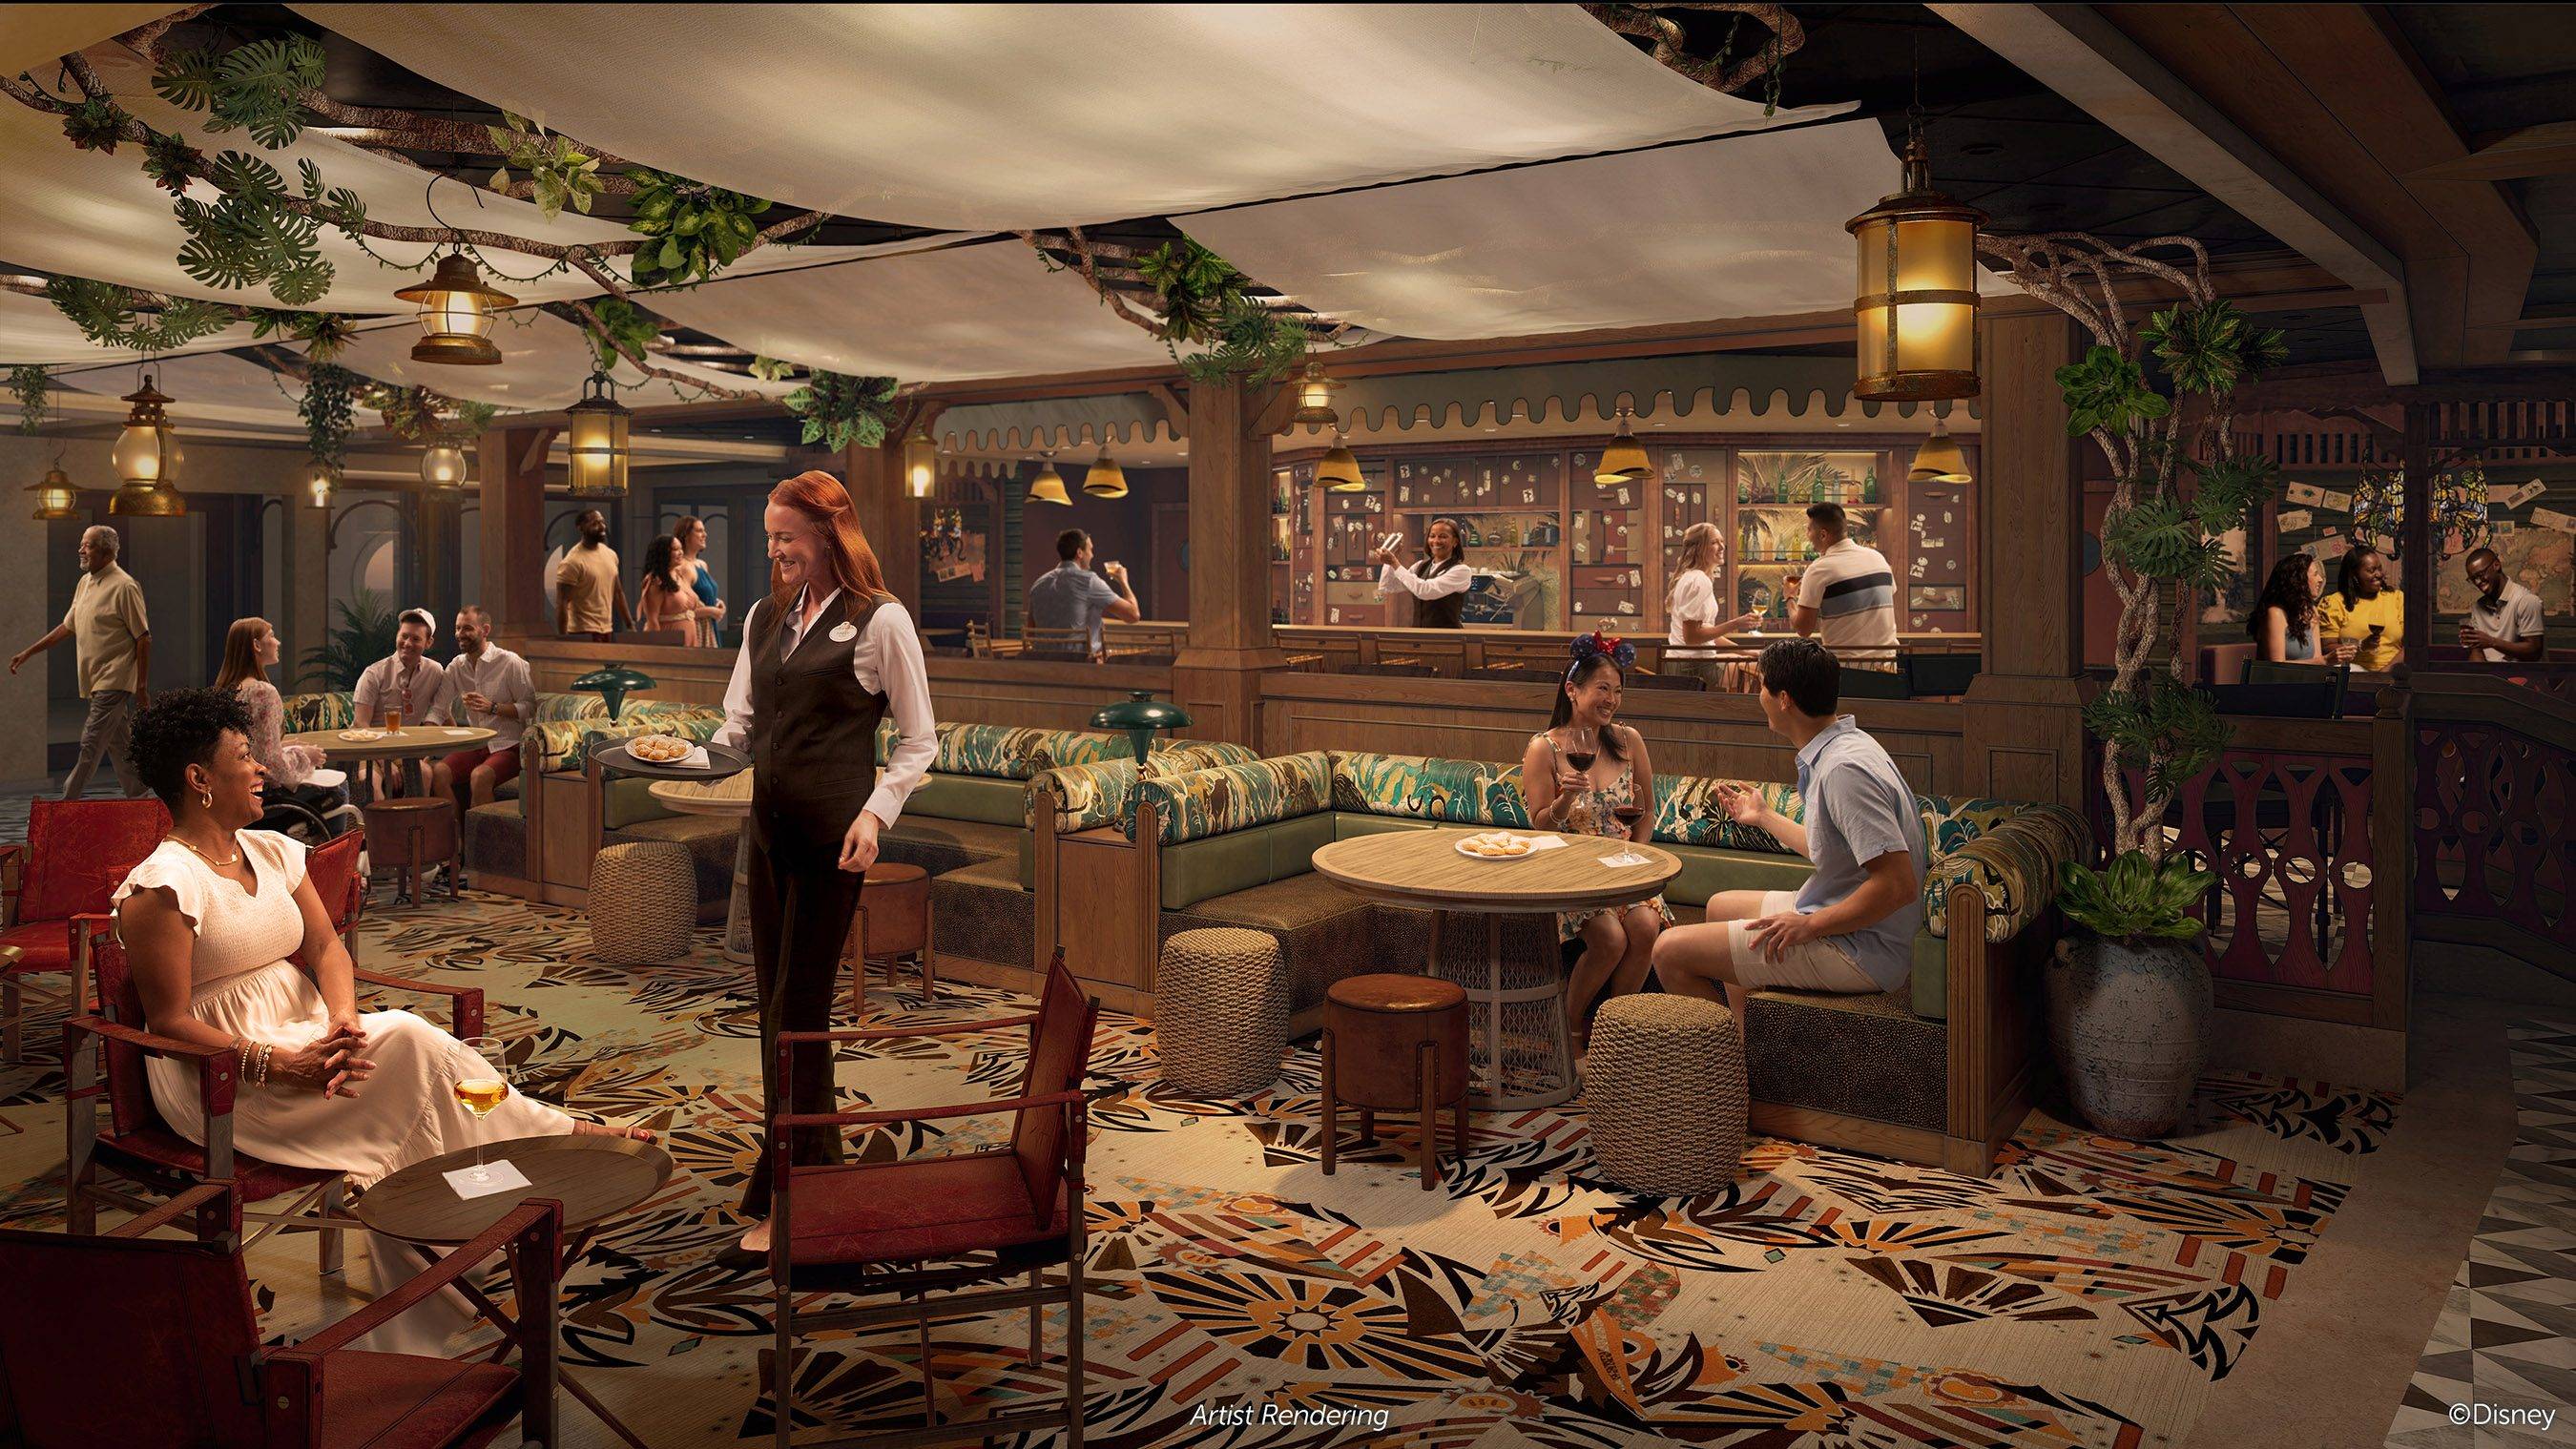 Skipper Society will be filled with sly tributes to the trusty, dry-witted Jungle Cruise skippers who lead world-famous tours across treacherous waterways for an elevated, yet playful atmosphere where guests will indulge in themed cocktails and light snacks.